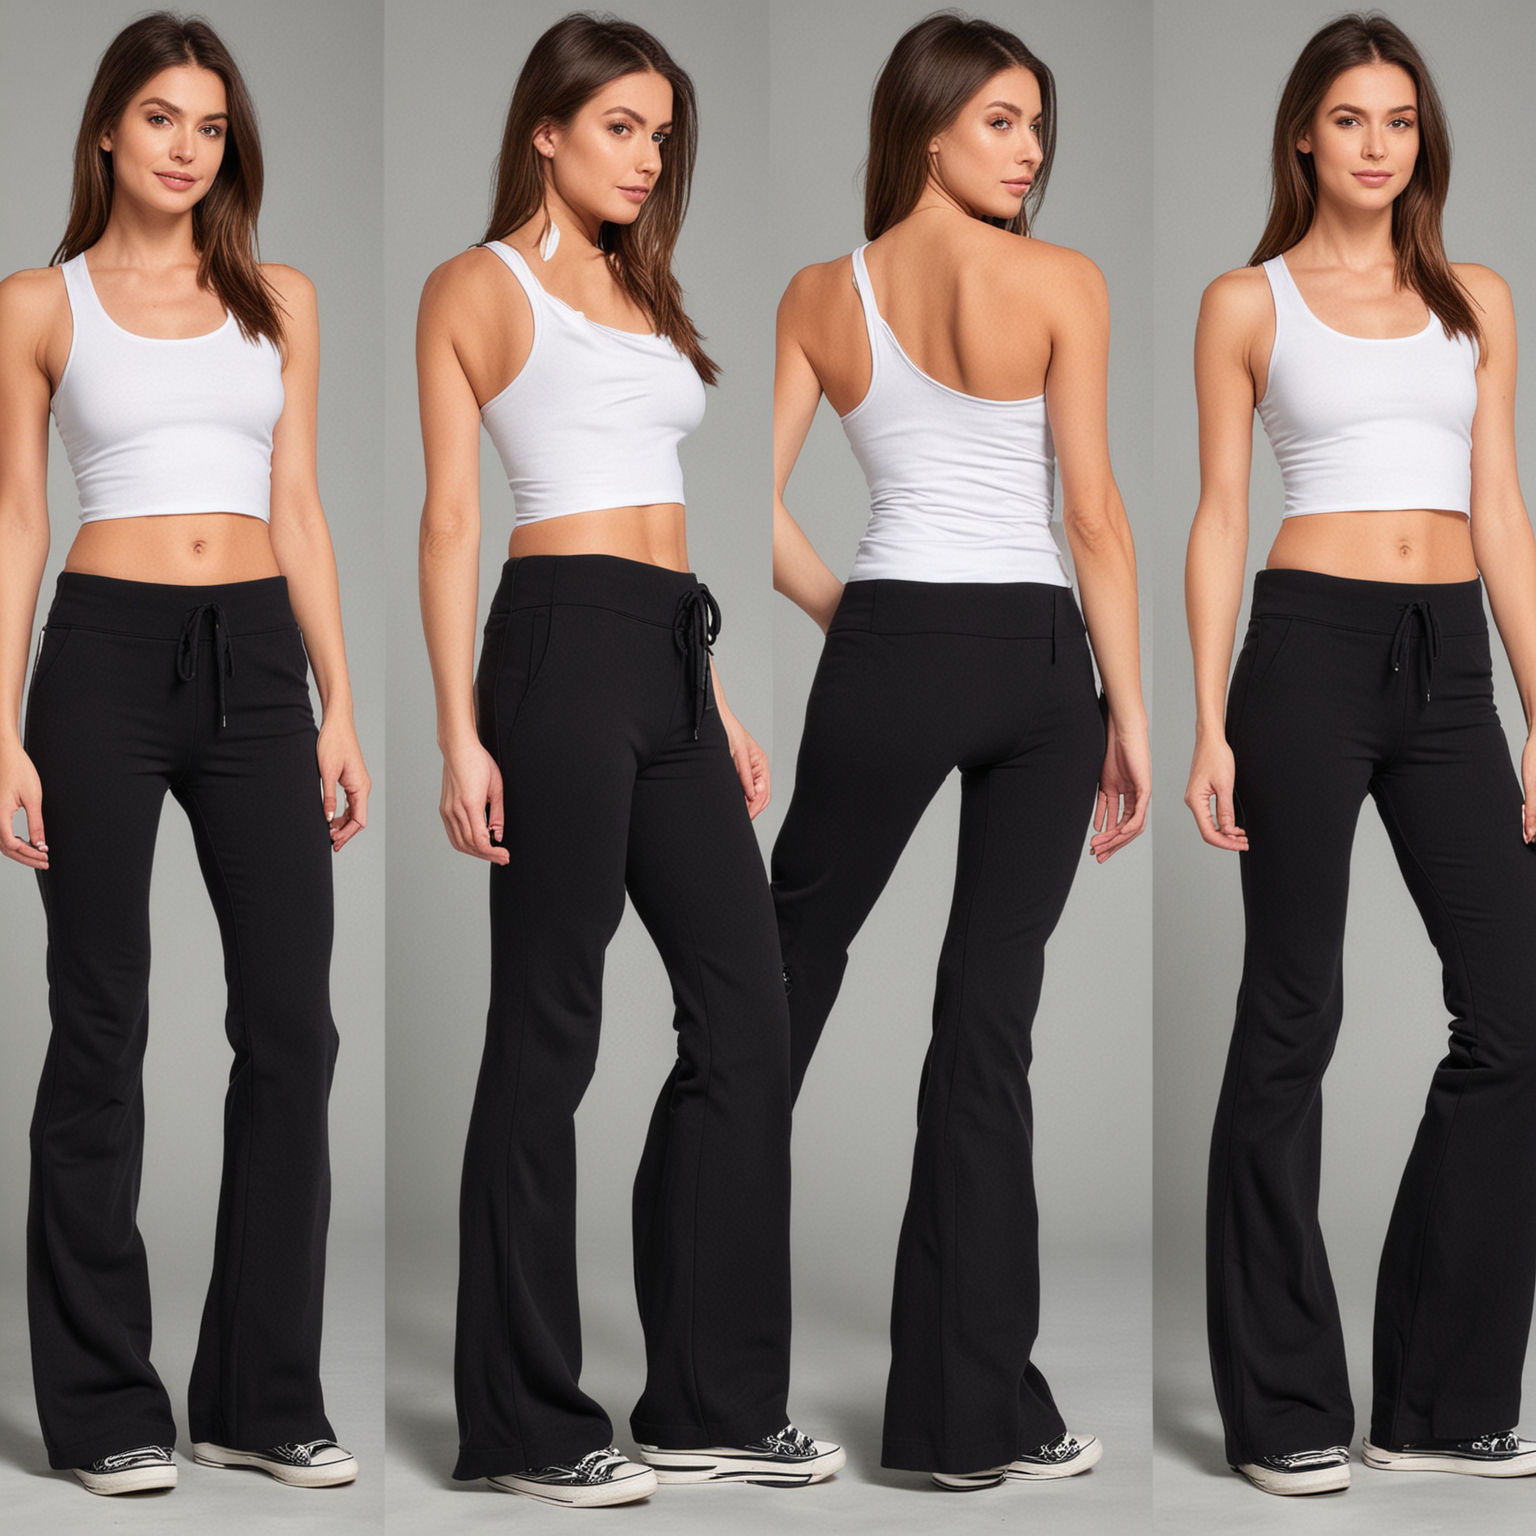 Four Angles of Slim Woman in Black Cotton Flare Track Pants